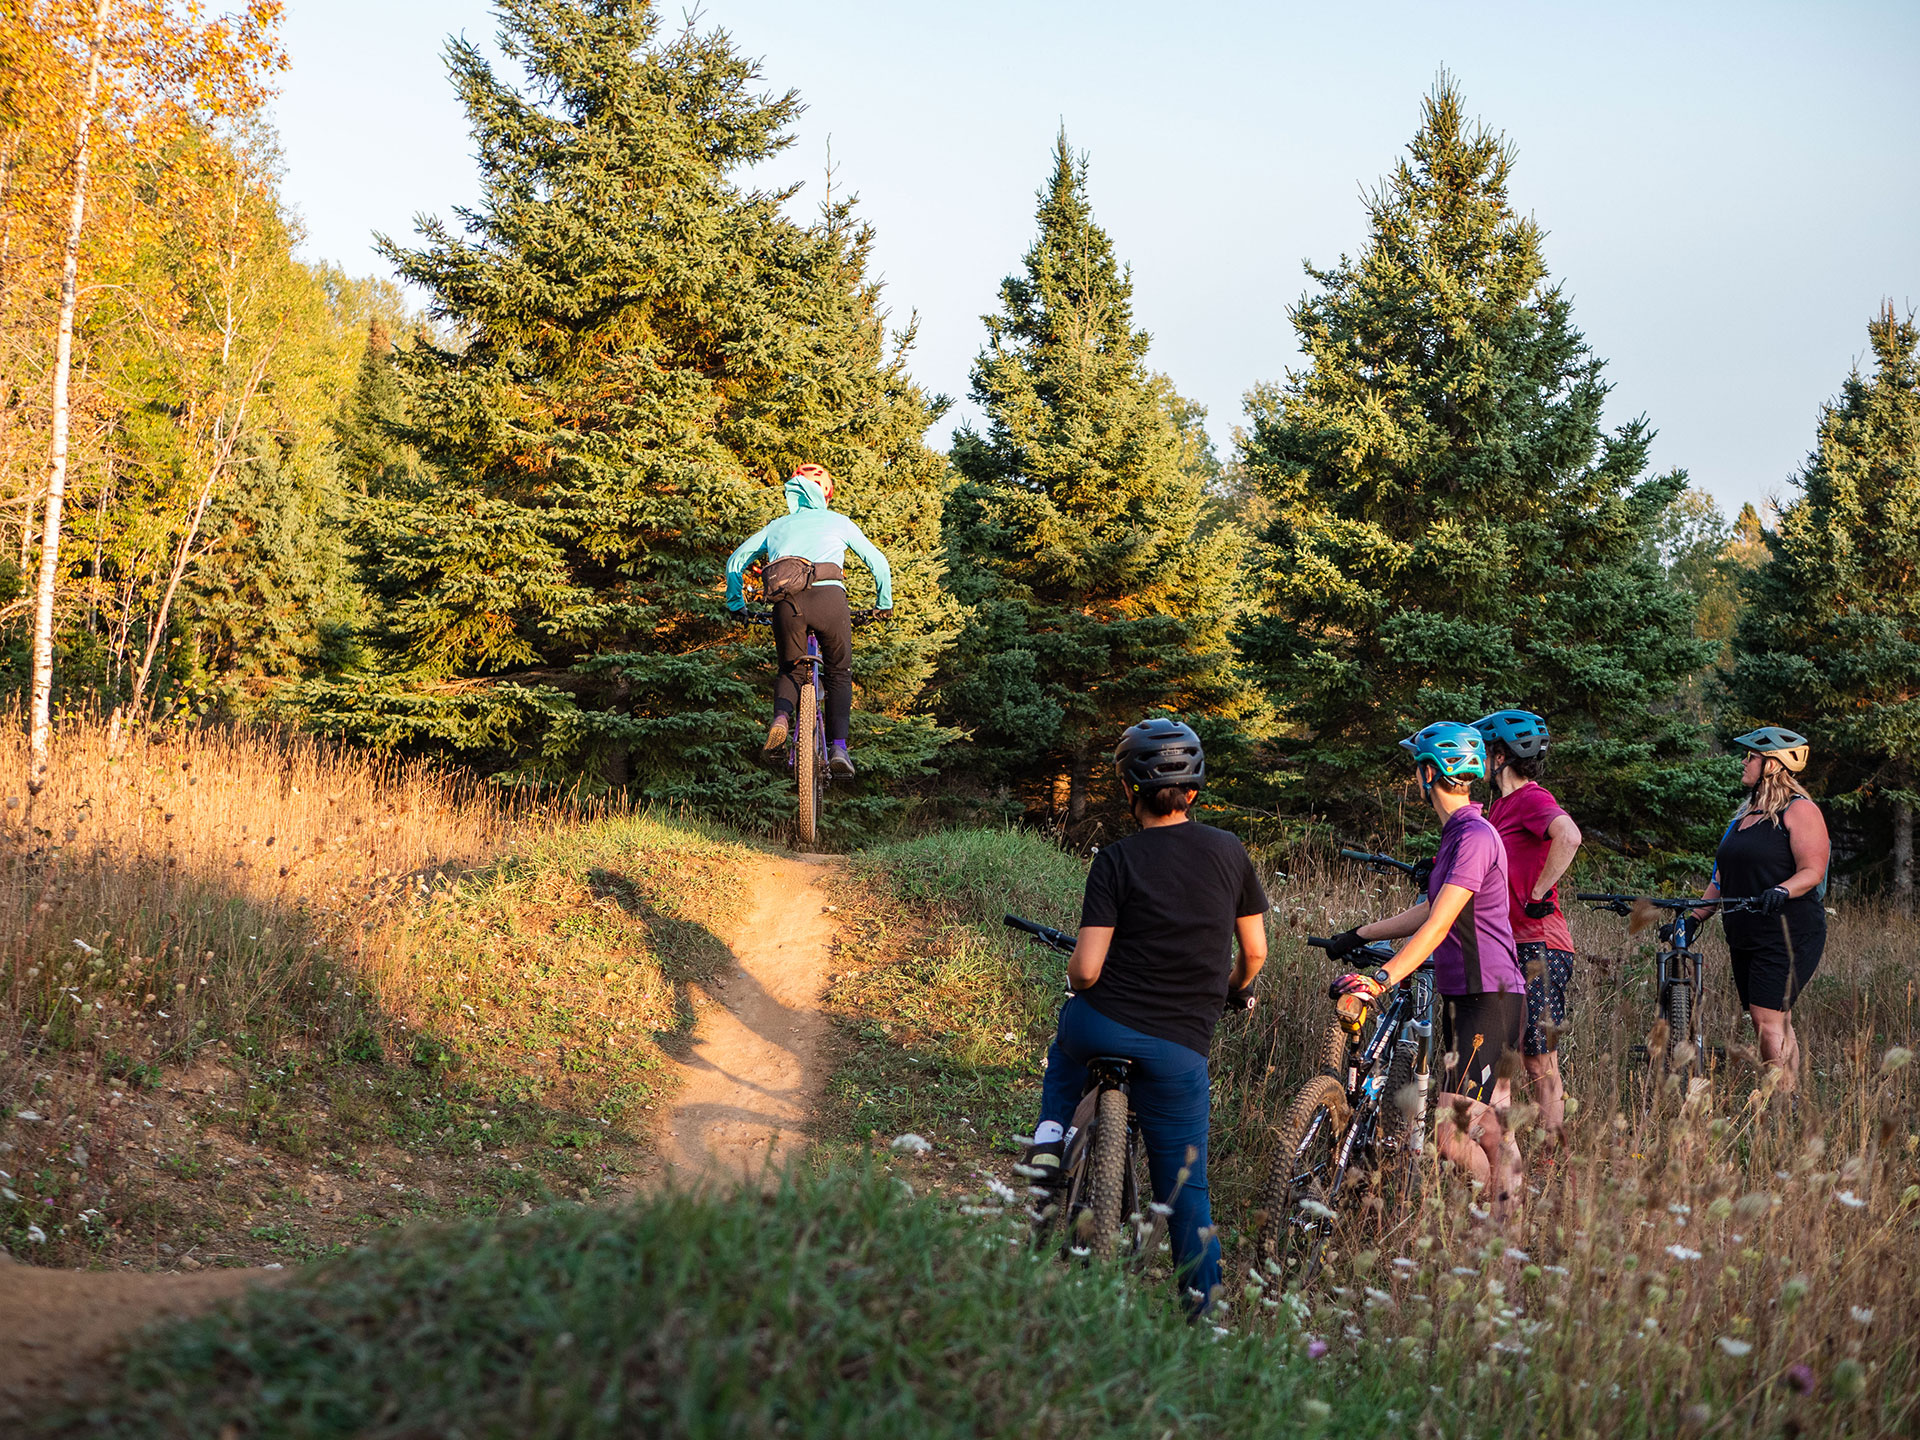 one young cyclist rides on a dirt trail while others watch